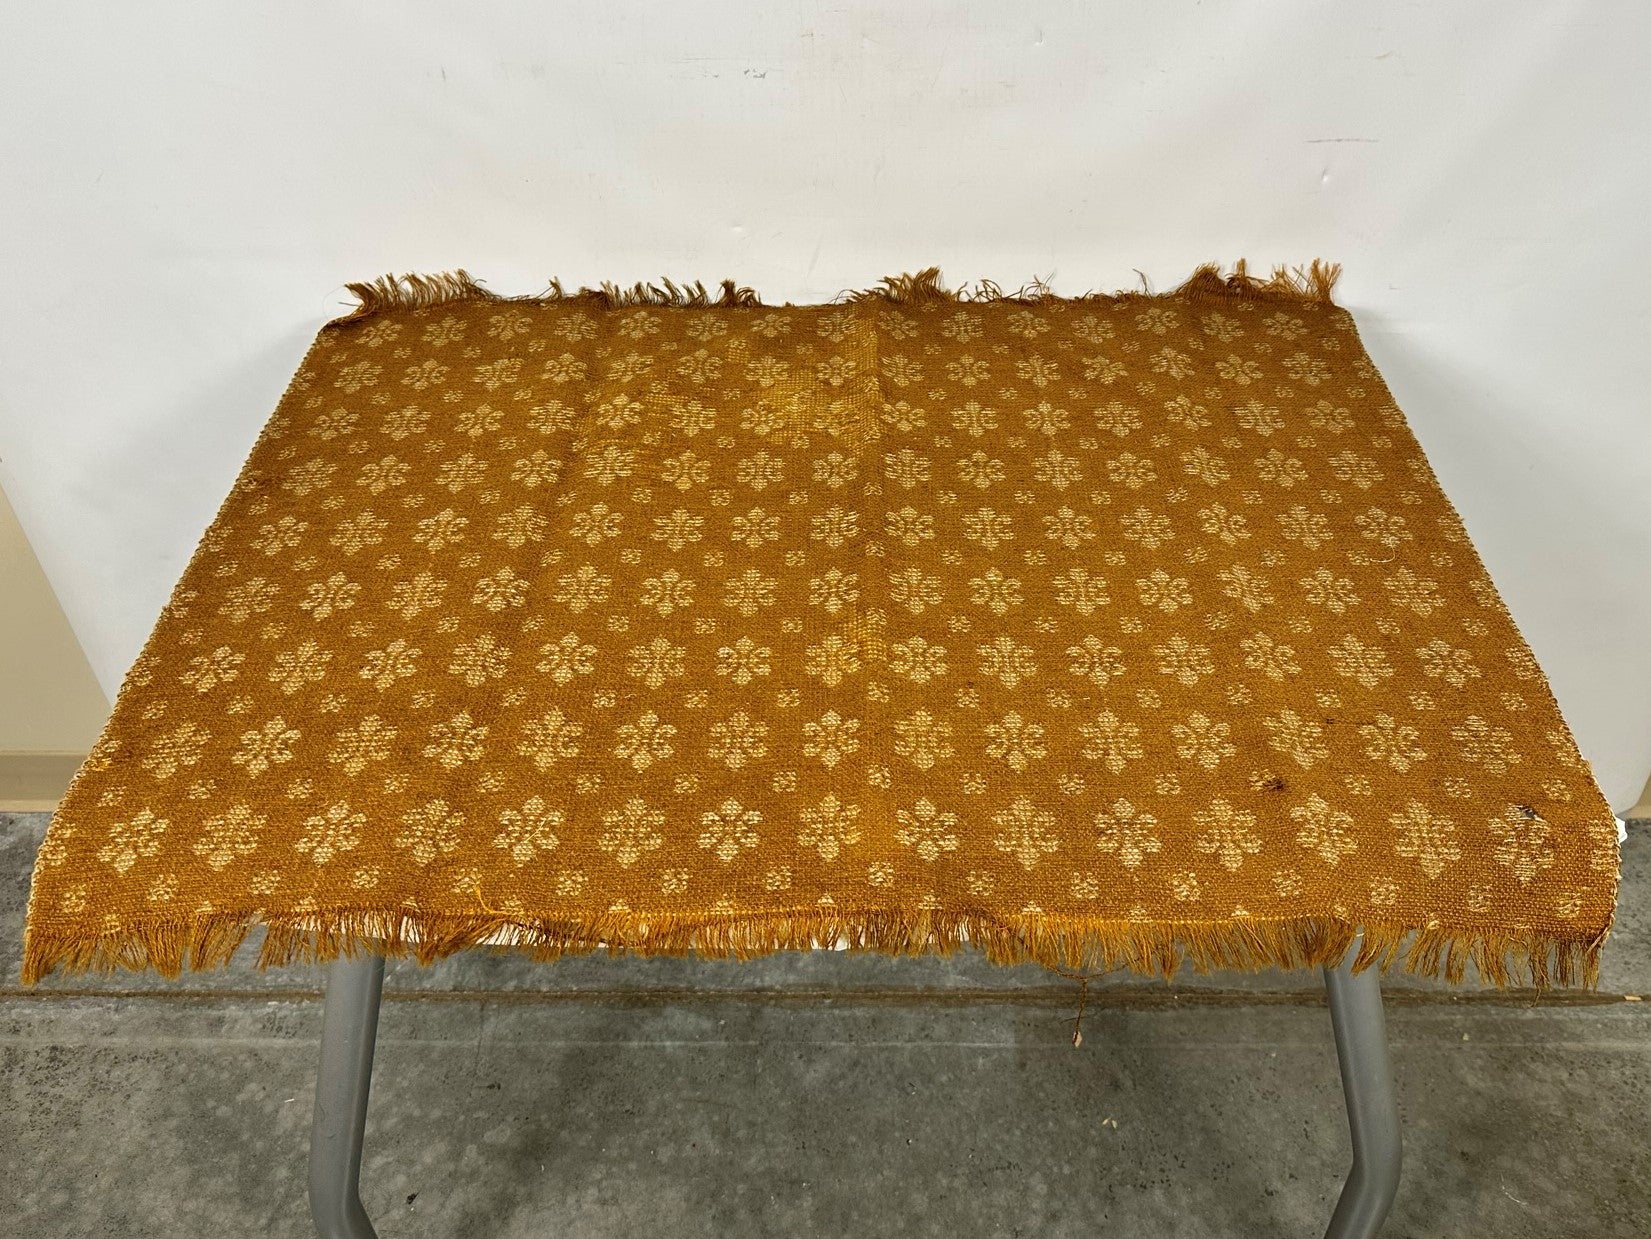 Antique 36x29 Brown Jacquard Woven Wool Rug